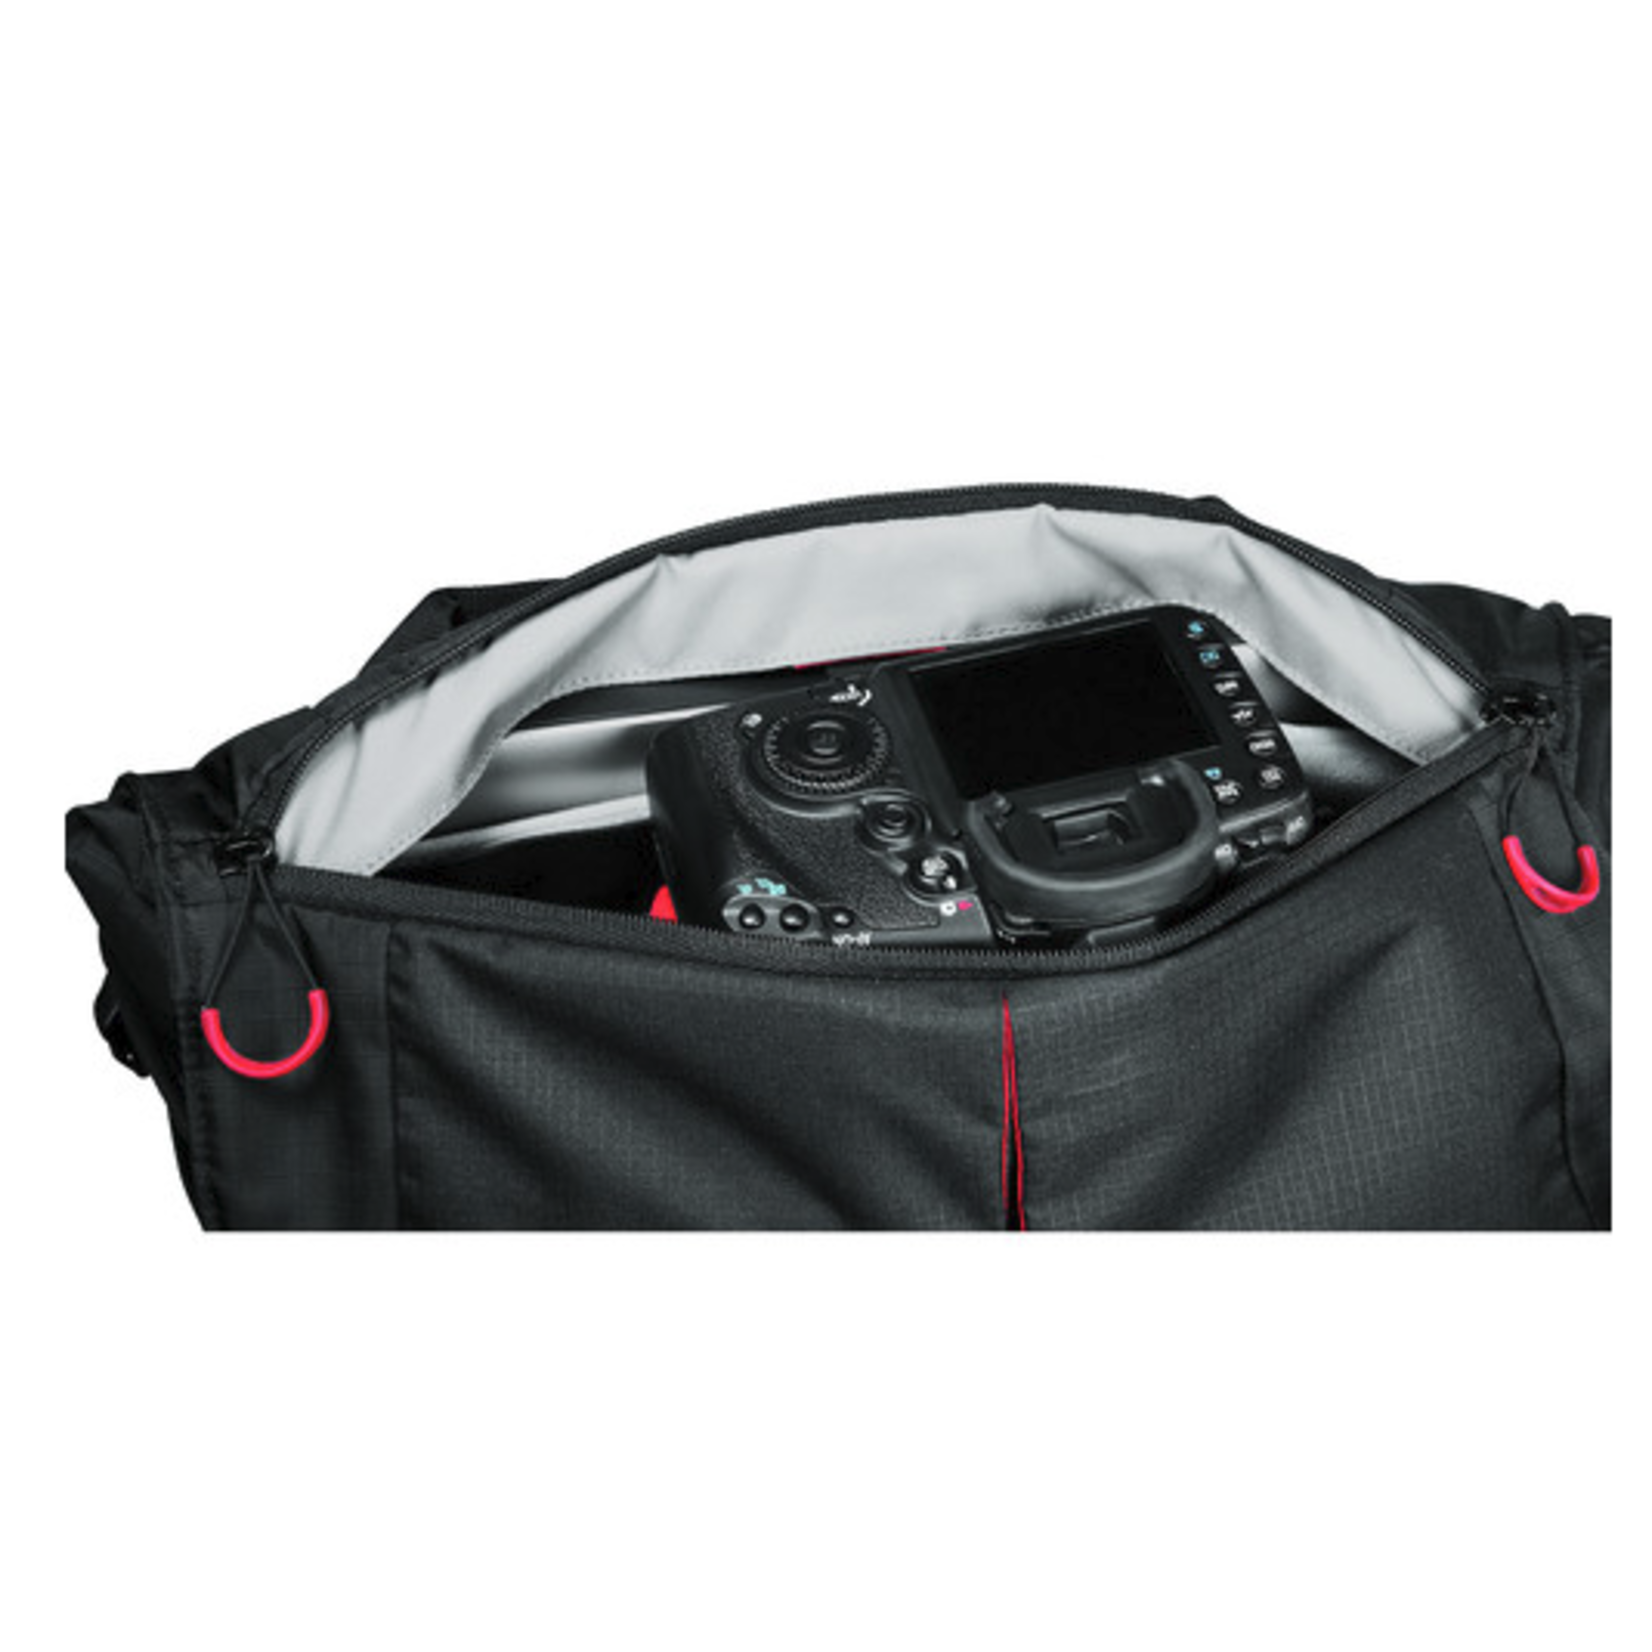 Manfrotto Manfrotto Pro Light Bumblebee M-30 Camera Bag (Black)